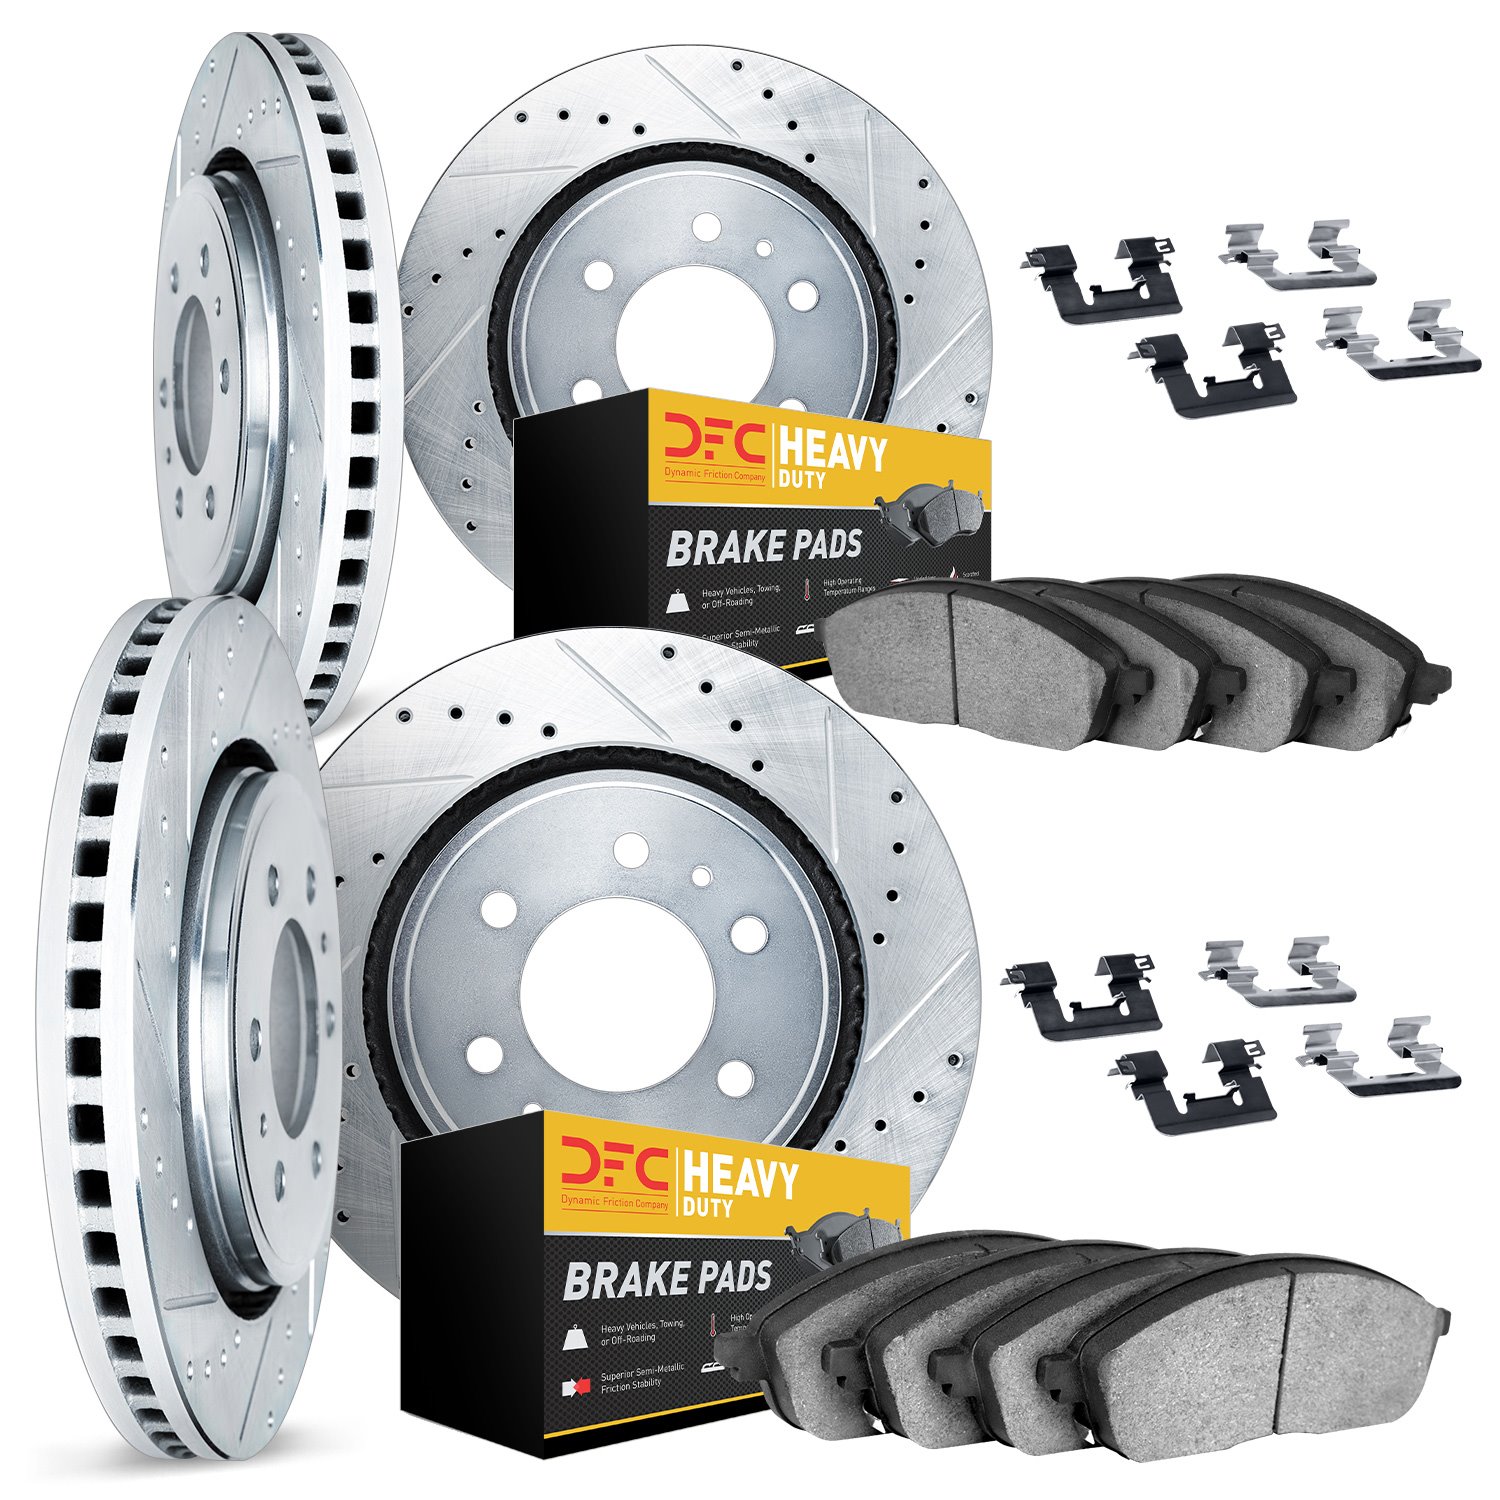 7214-54087 Drilled/Slotted Rotors w/Heavy-Duty Brake Pads Kit & Hardware [Silver], 2007-2009 Ford/Lincoln/Mercury/Mazda, Positio